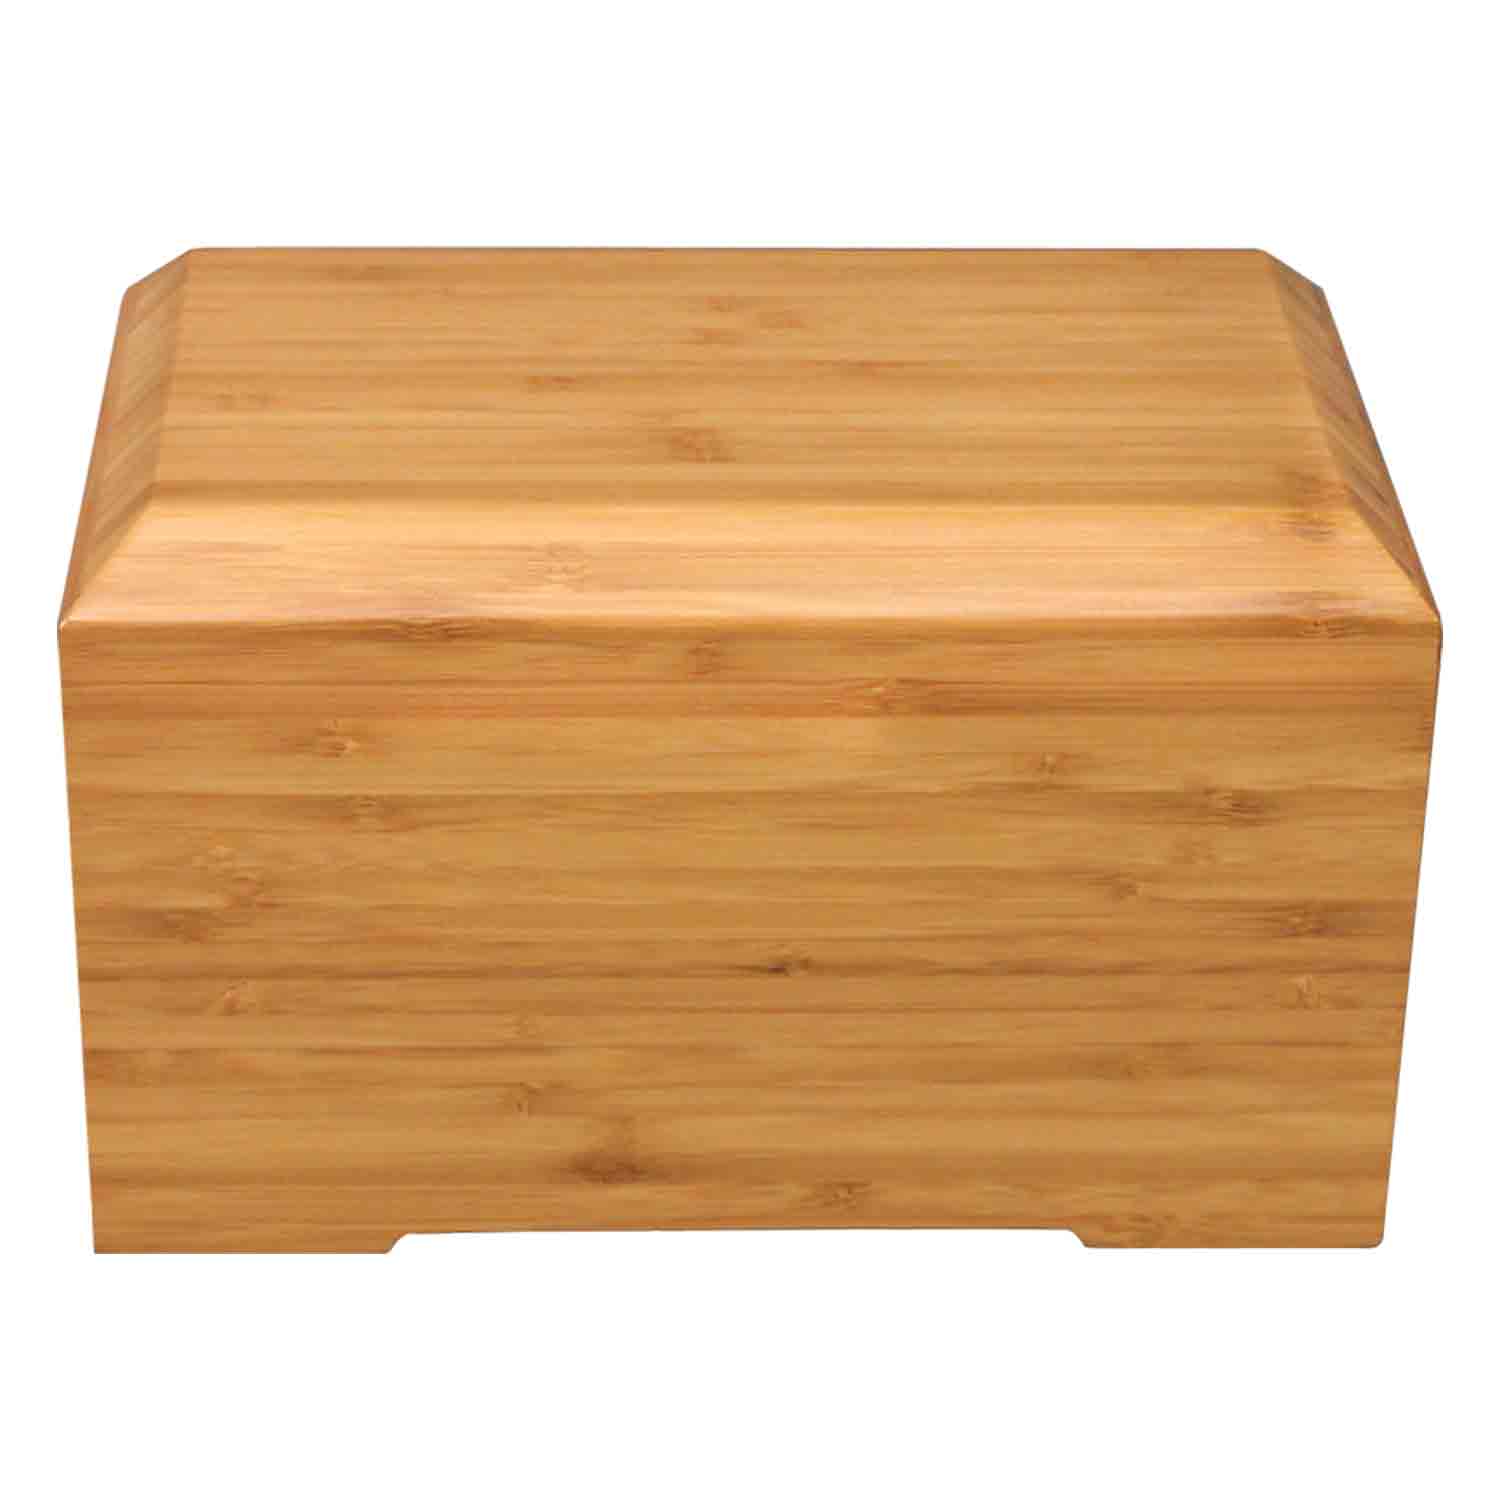 Tribute Solid Bamboo Semi Permanent Biodegradable Urn for Ashes From The Front